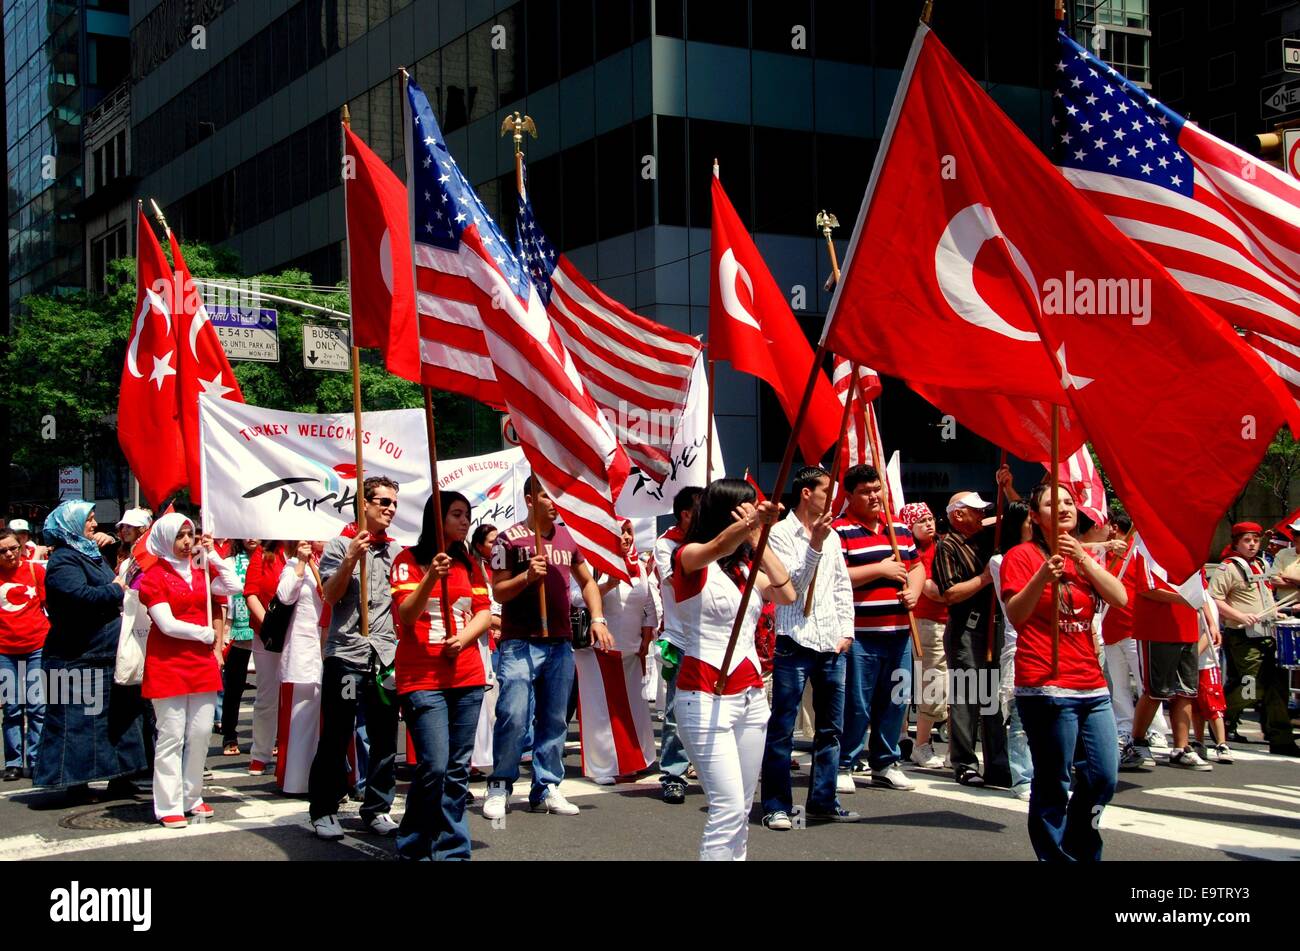 NYC Marchers carrying flags at the annual Turkish Day Parade on